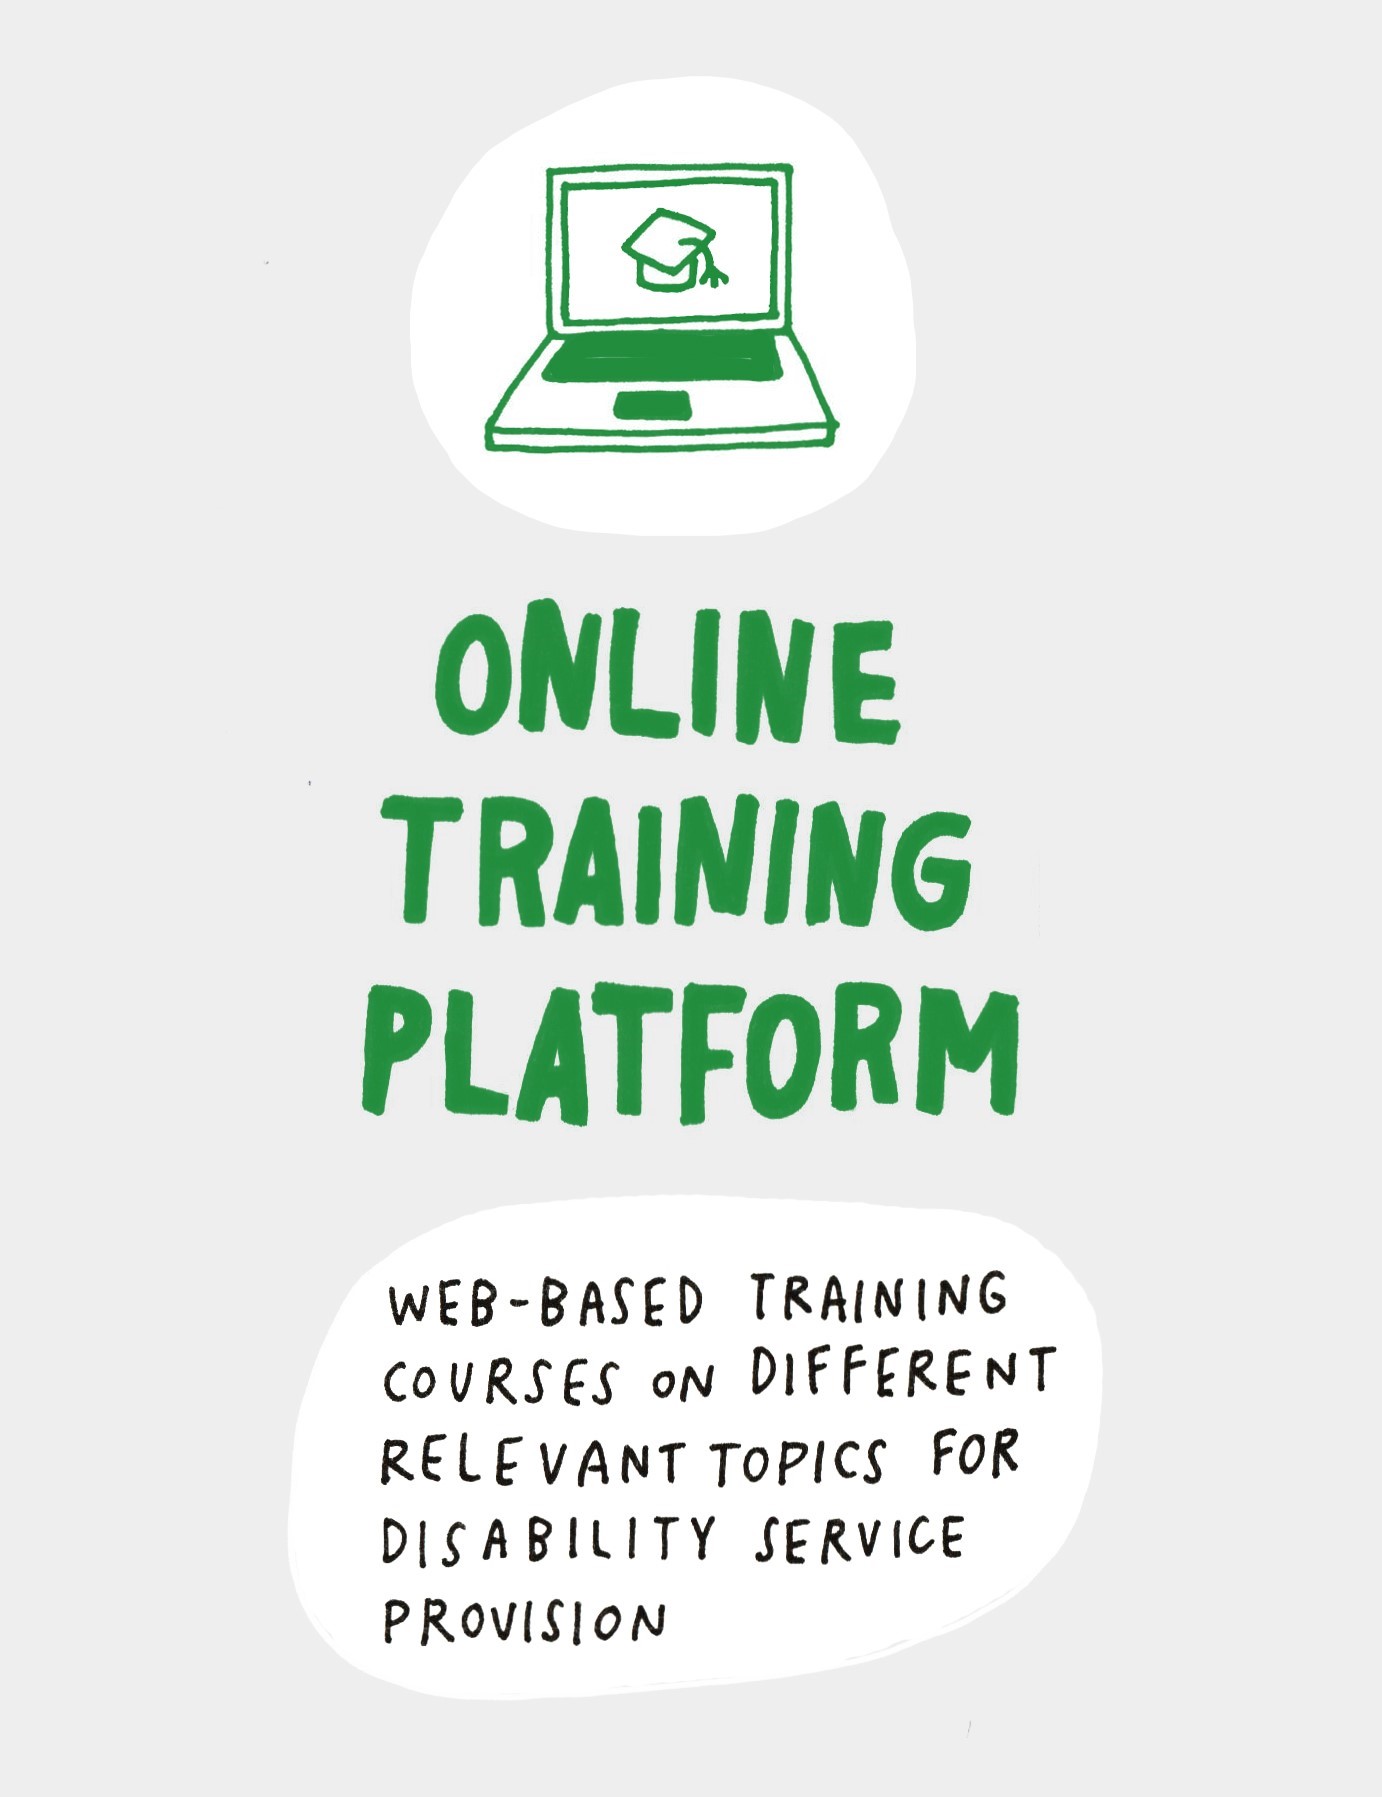 On-line training platform: web-based training courses on different relevant topics for disability service provision